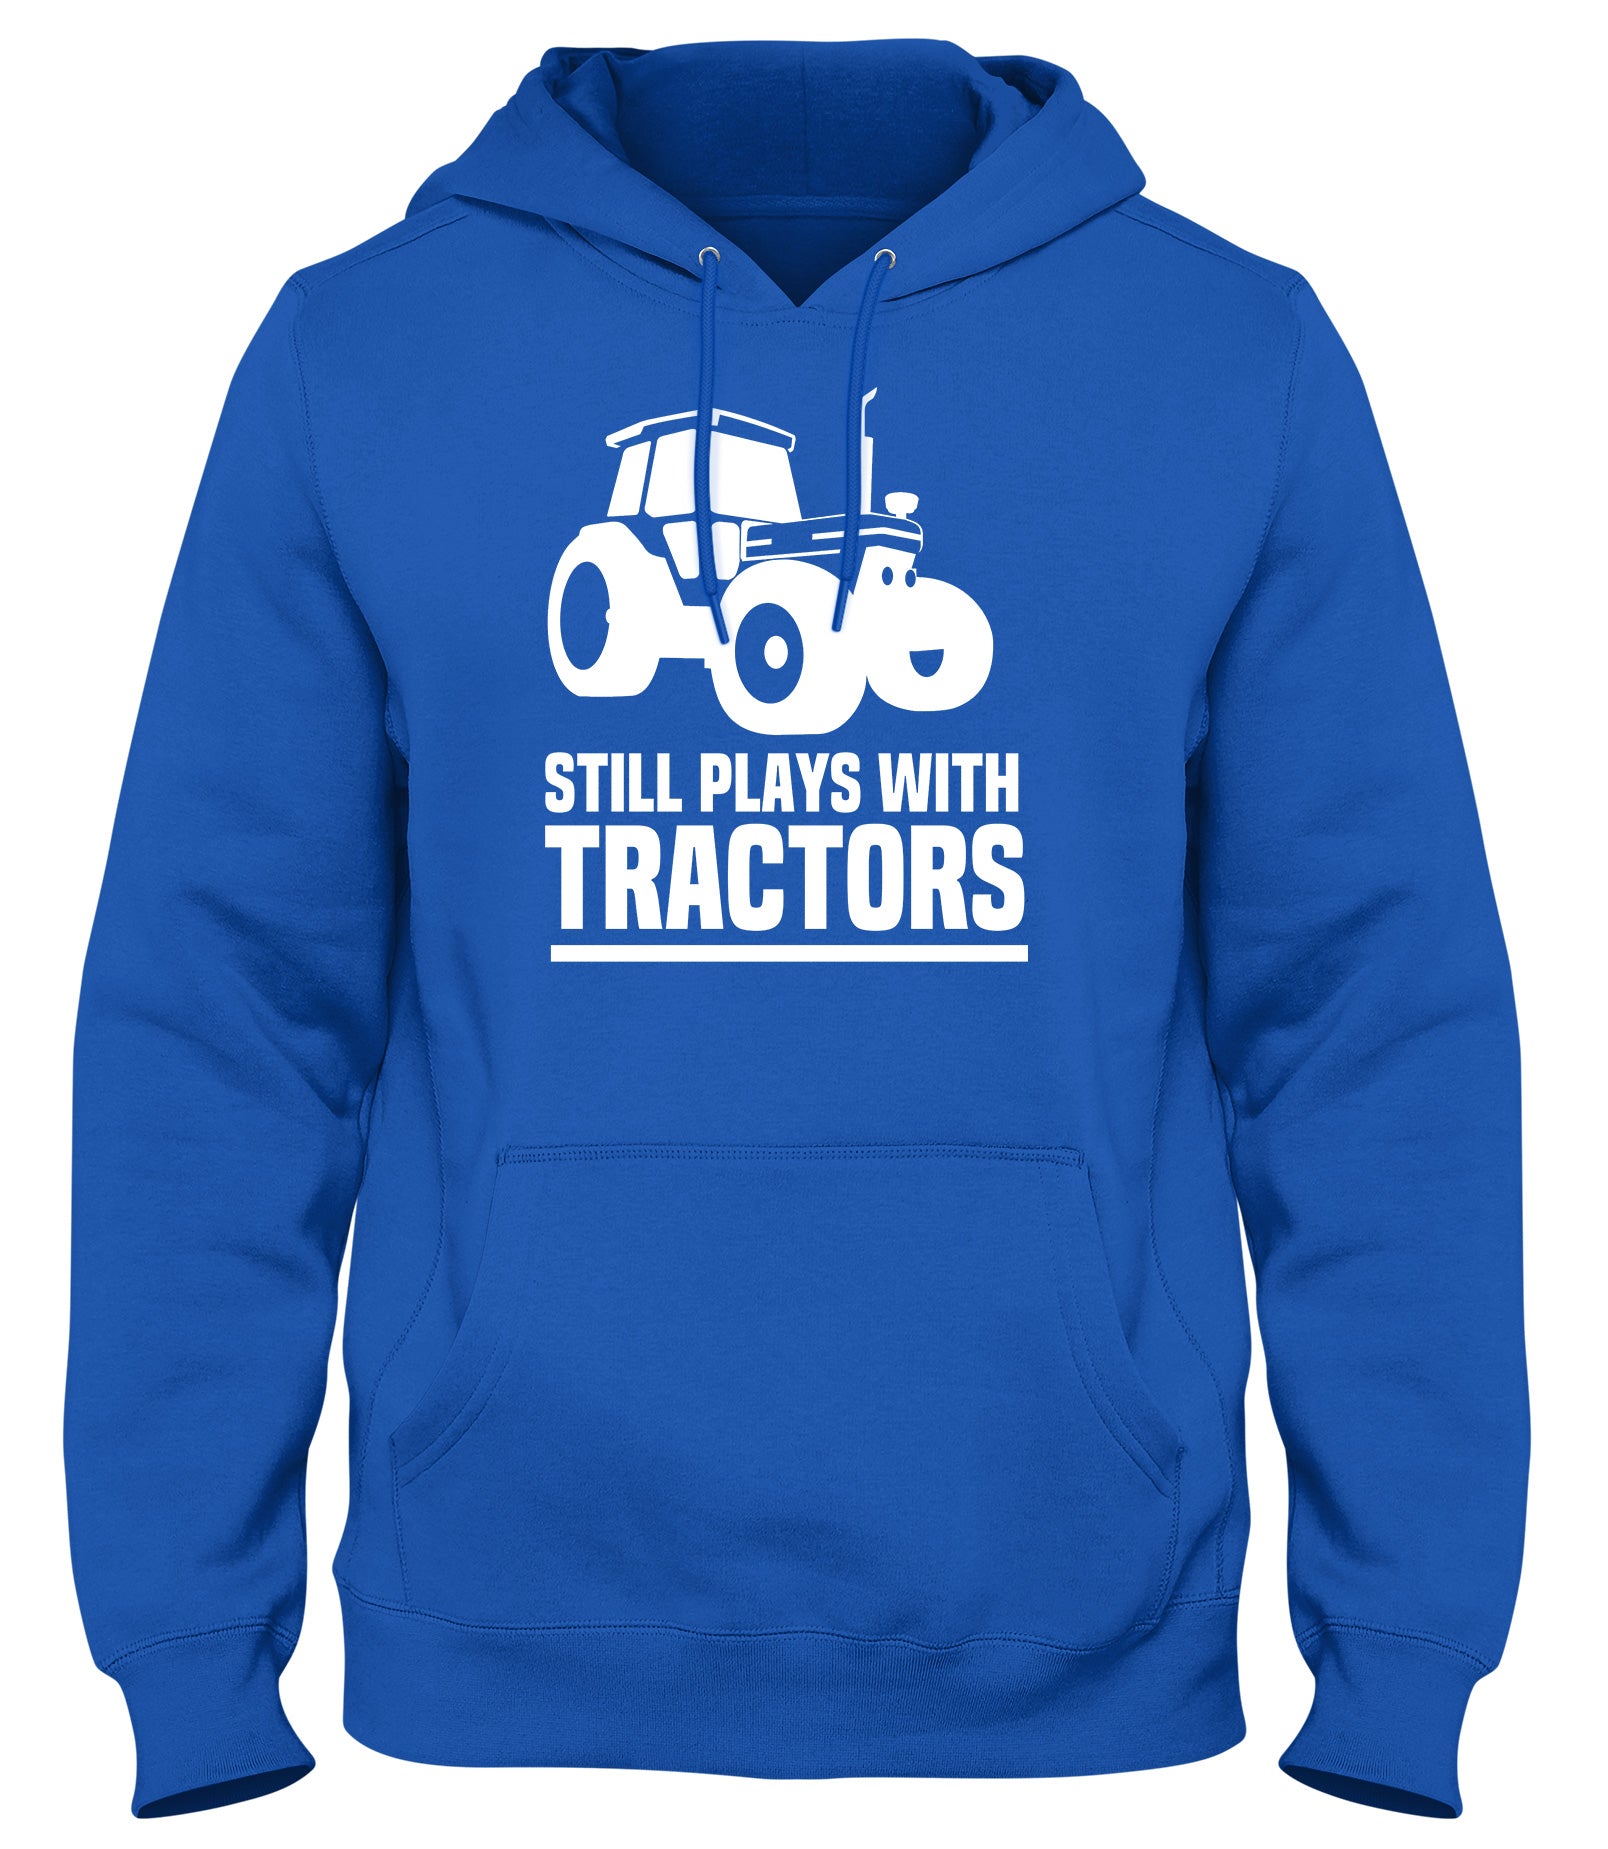 STILL PLAYS WITH TRACTORS MENS WOMENS LADIES UNISEX FUNNY SLOGAN HOODIE